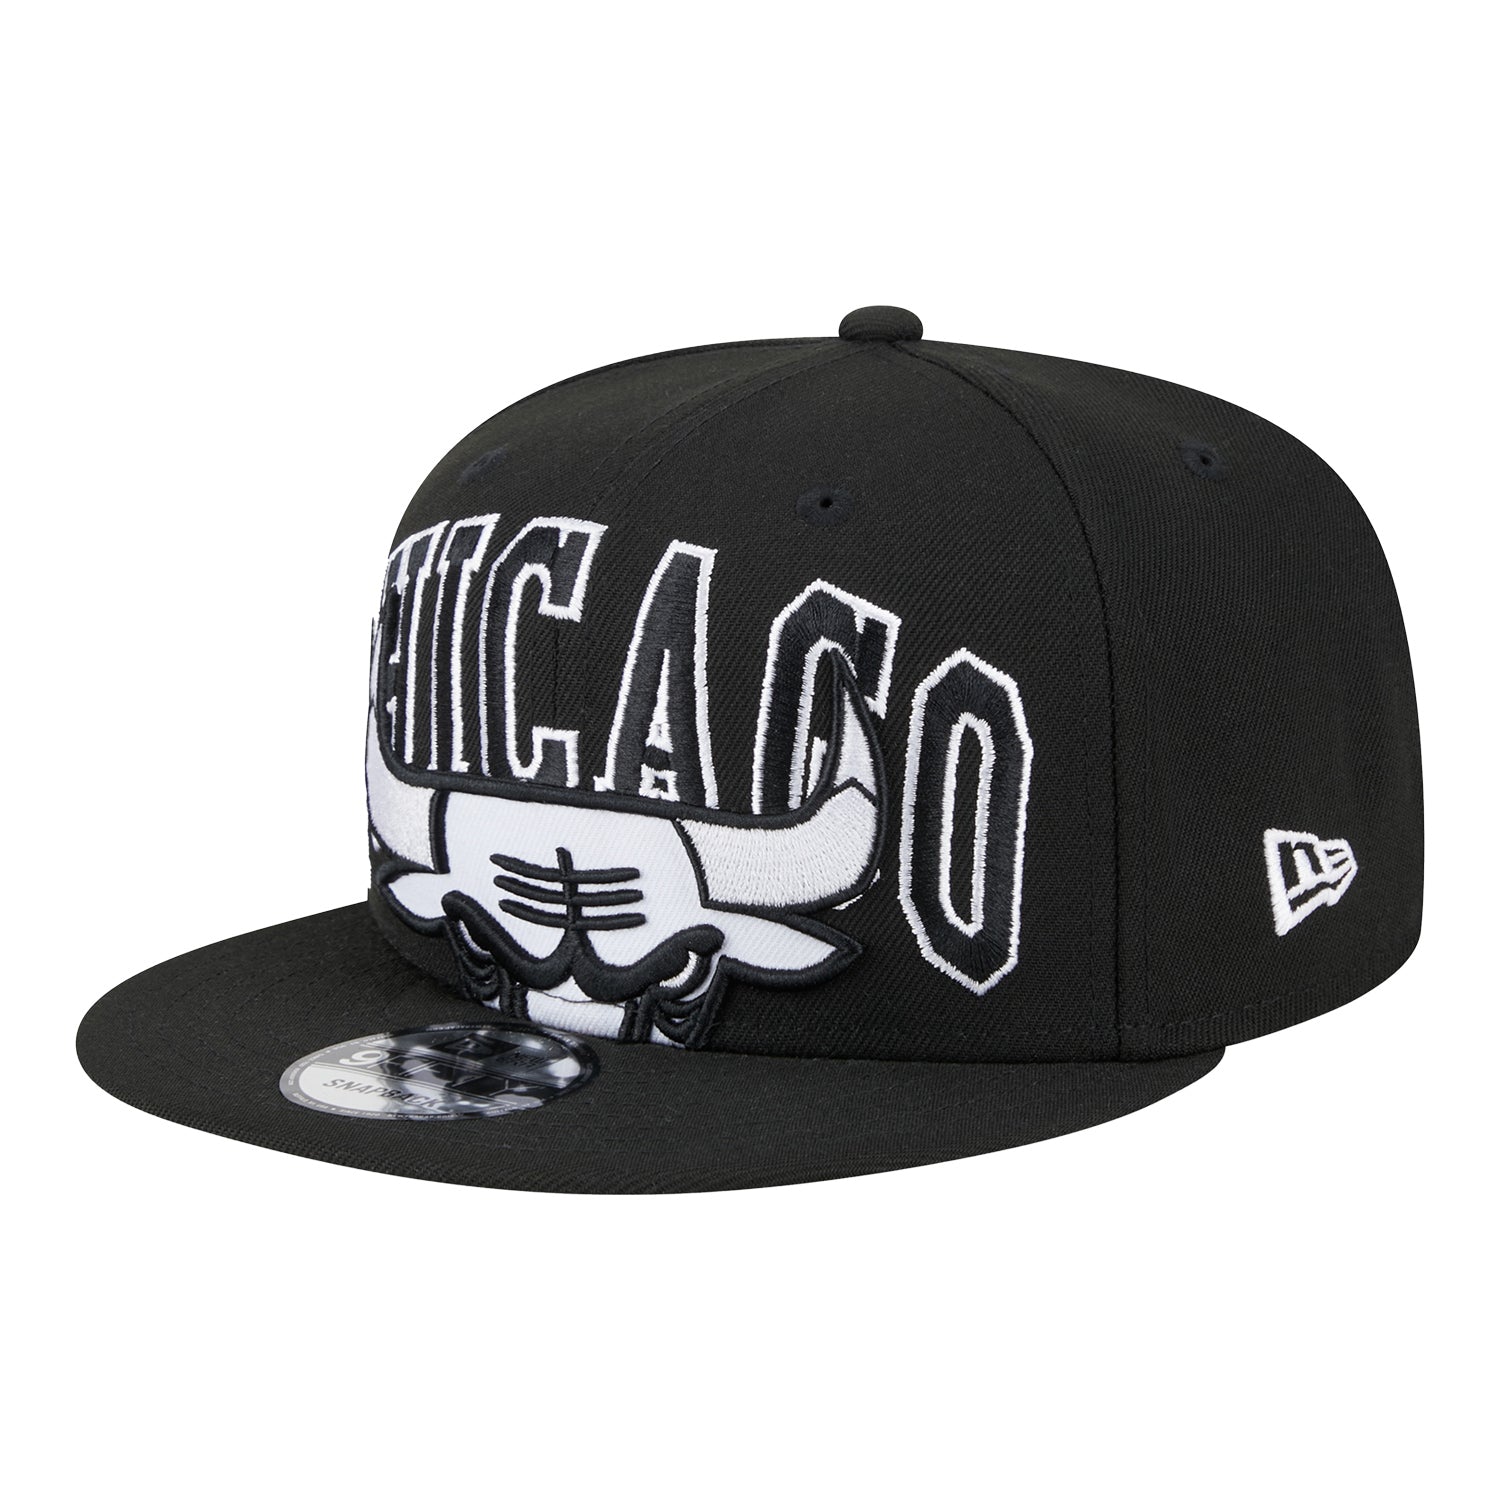 Chicago Bulls 23 Tip Off Snapback Hat - black and white - front view